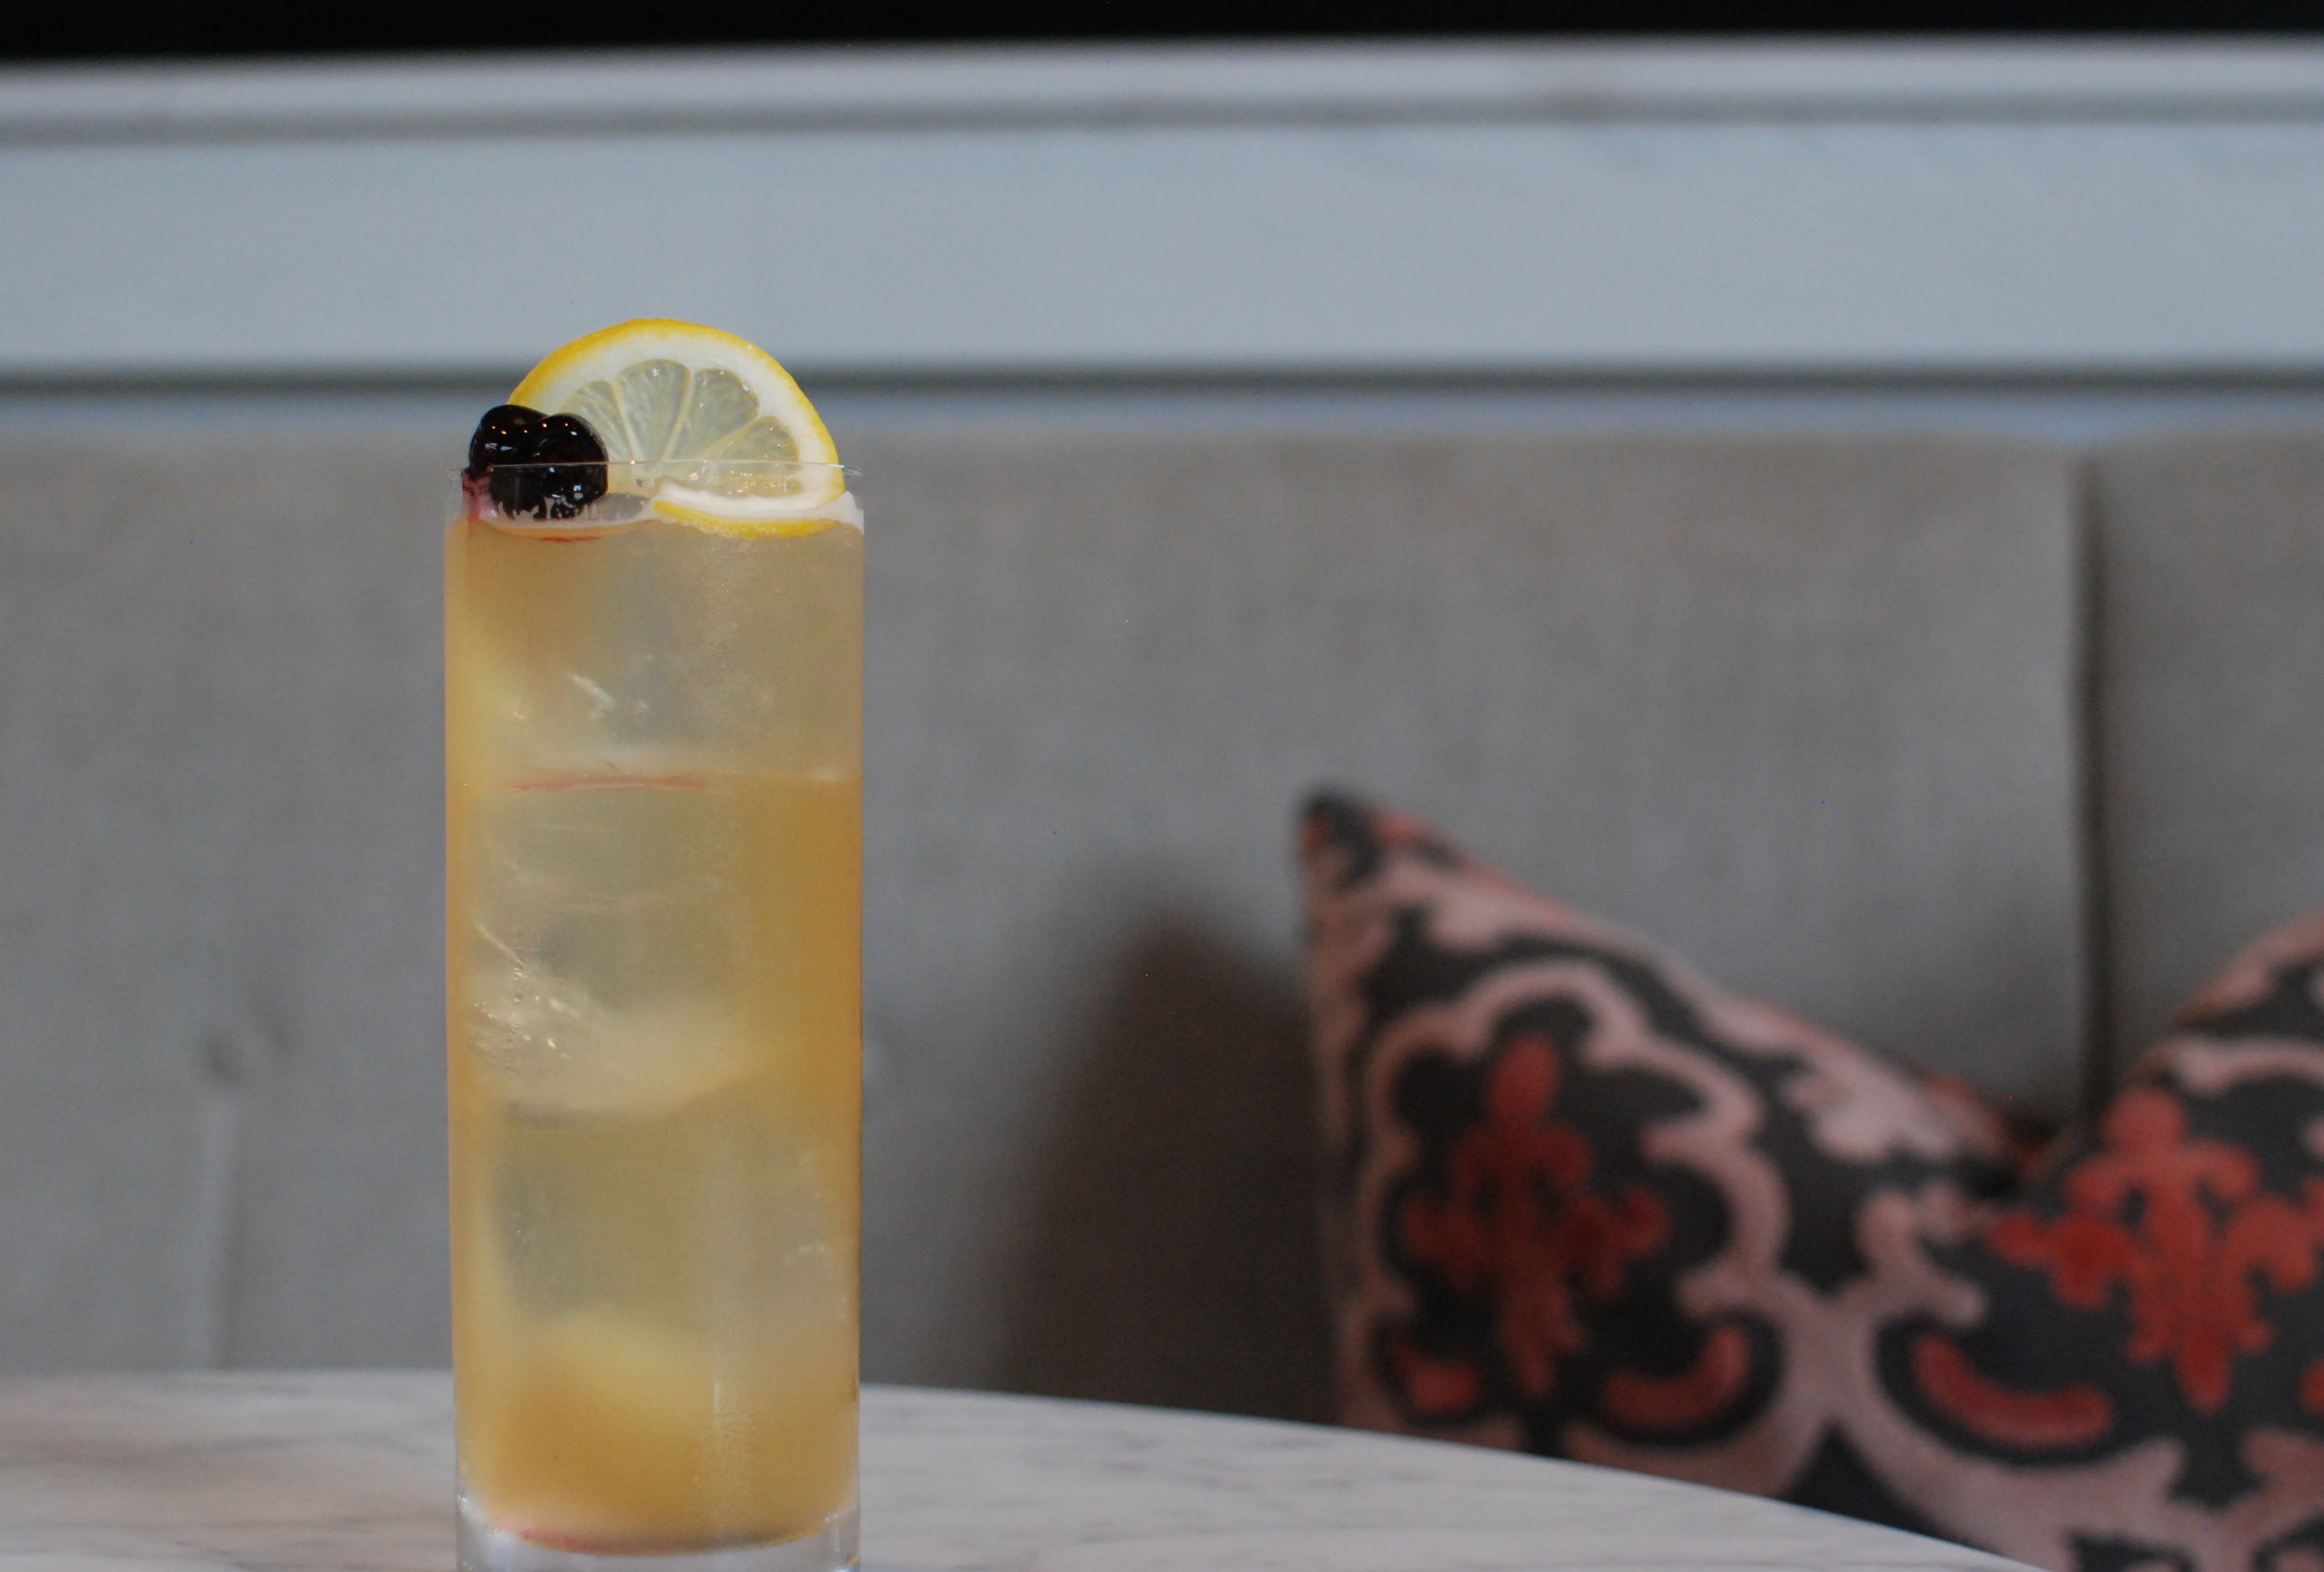 A tall glass with a yellow effervescent beverage garnished with a lemon wheel.